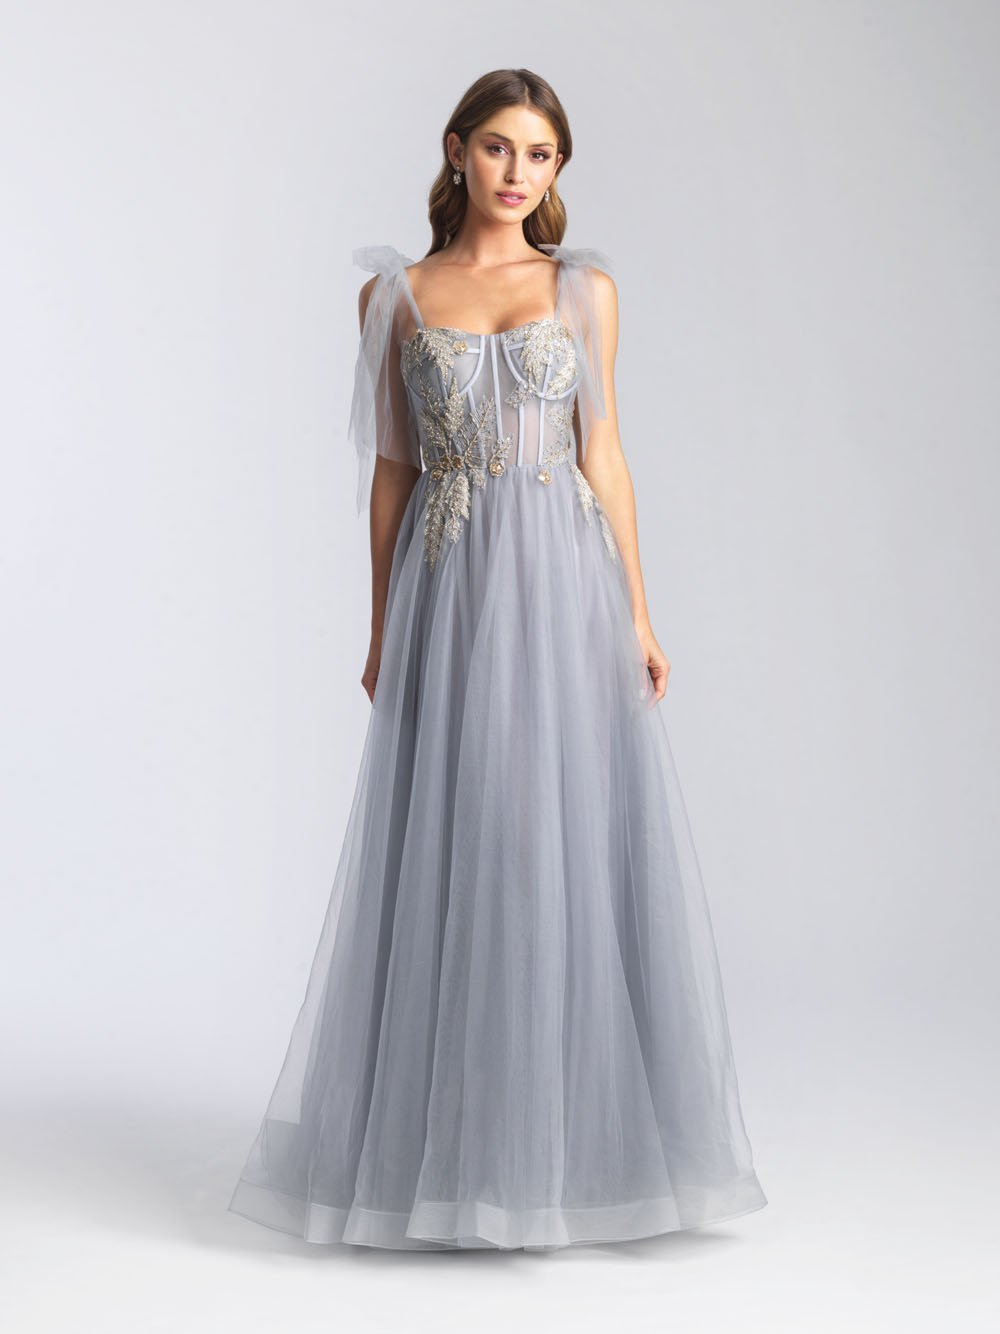 Madison James 20-343 dress images in these colors: Grey, Blush, Light Blue.